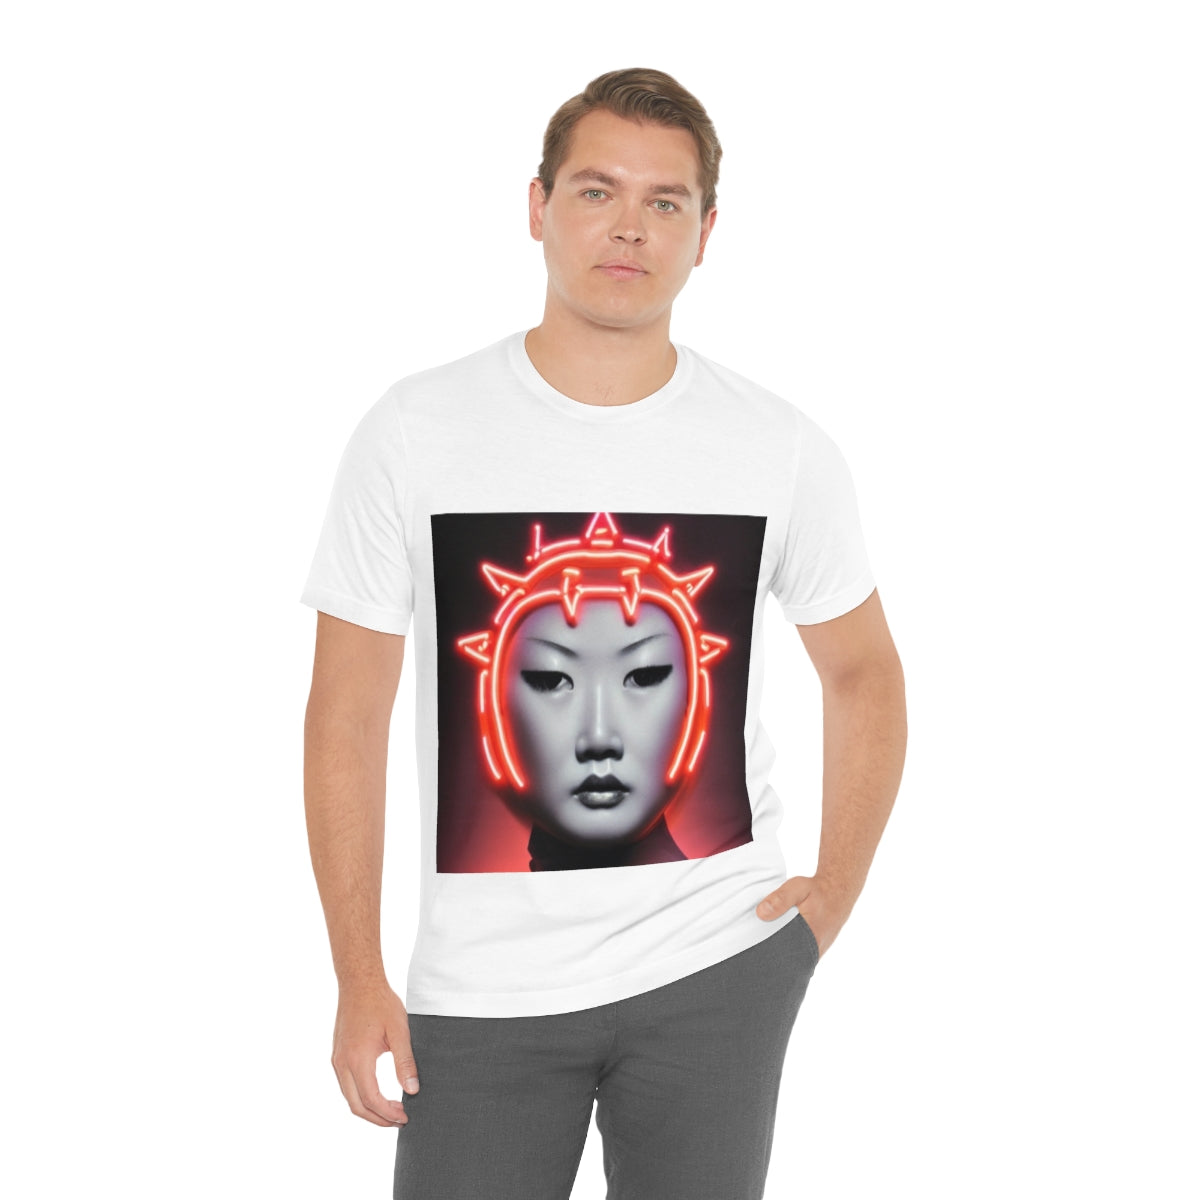 Innocently Sad_Mask Our Emotions T-Shirt Collection - DSIV